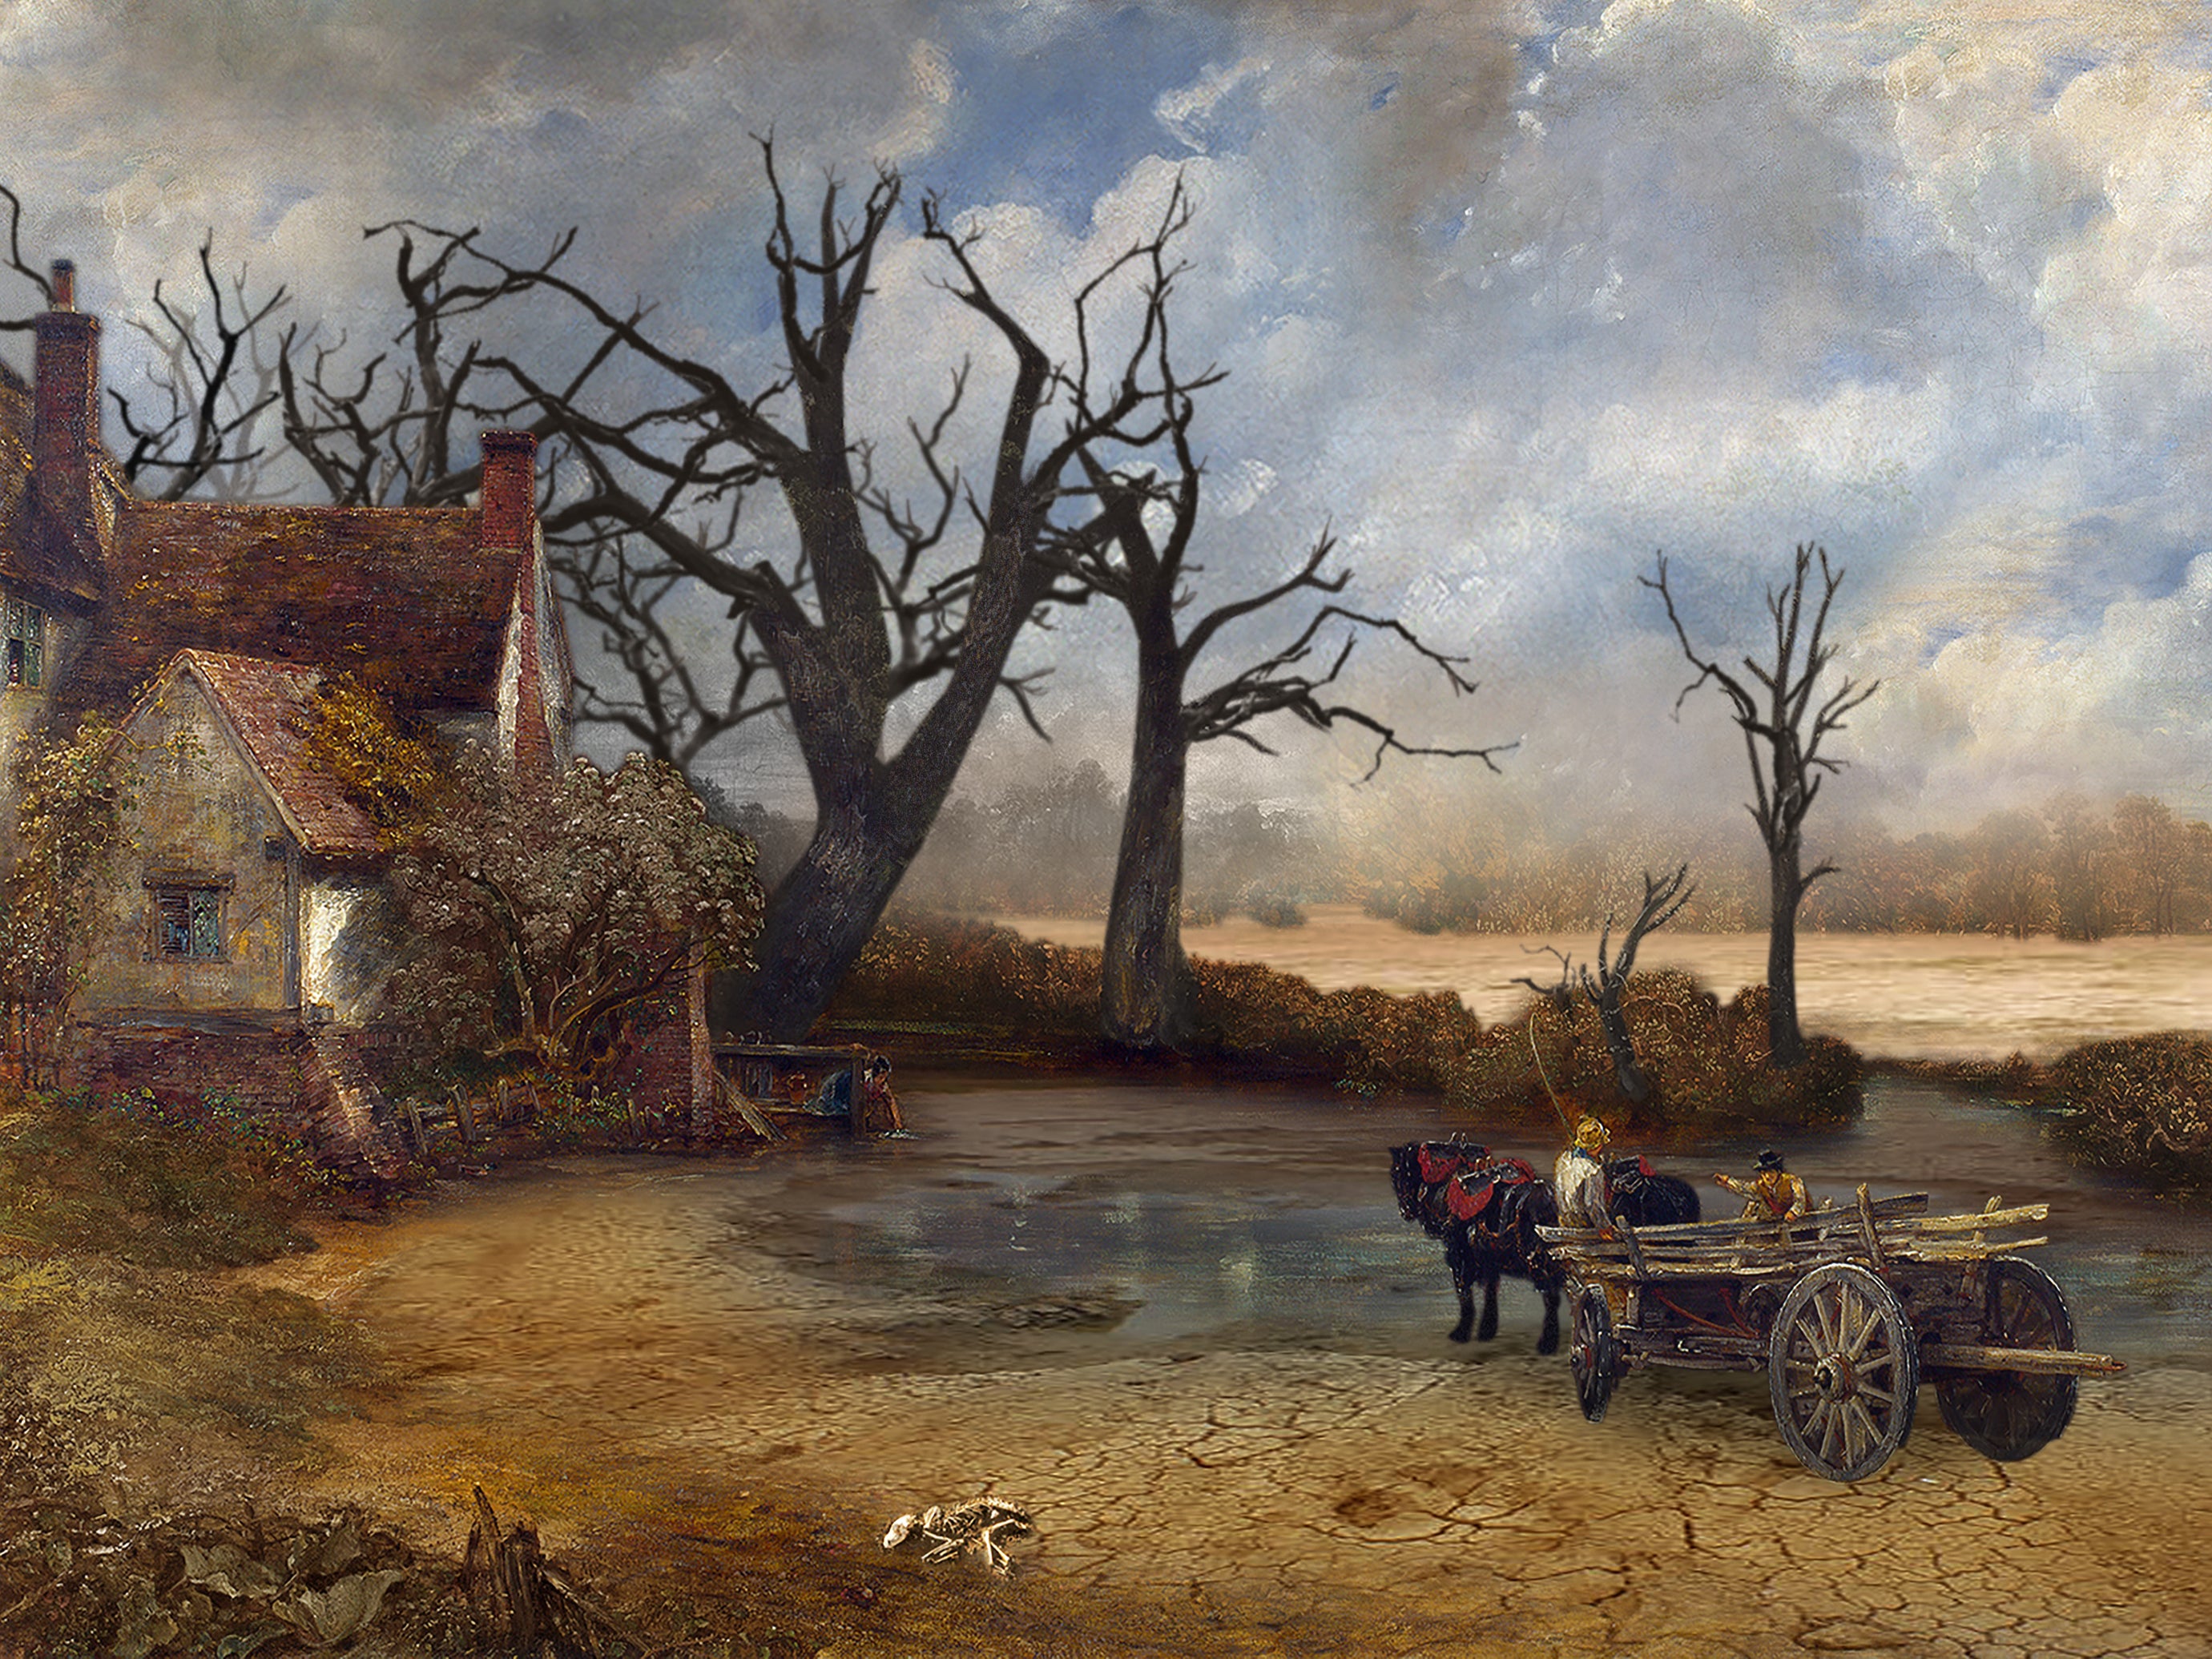 John Constable’s ‘The Hay Wain' (1821) has been re-imagined to illustrate the green riverside scene changinh to a barren and scorched earth landscape, depicting the dangers of global warming